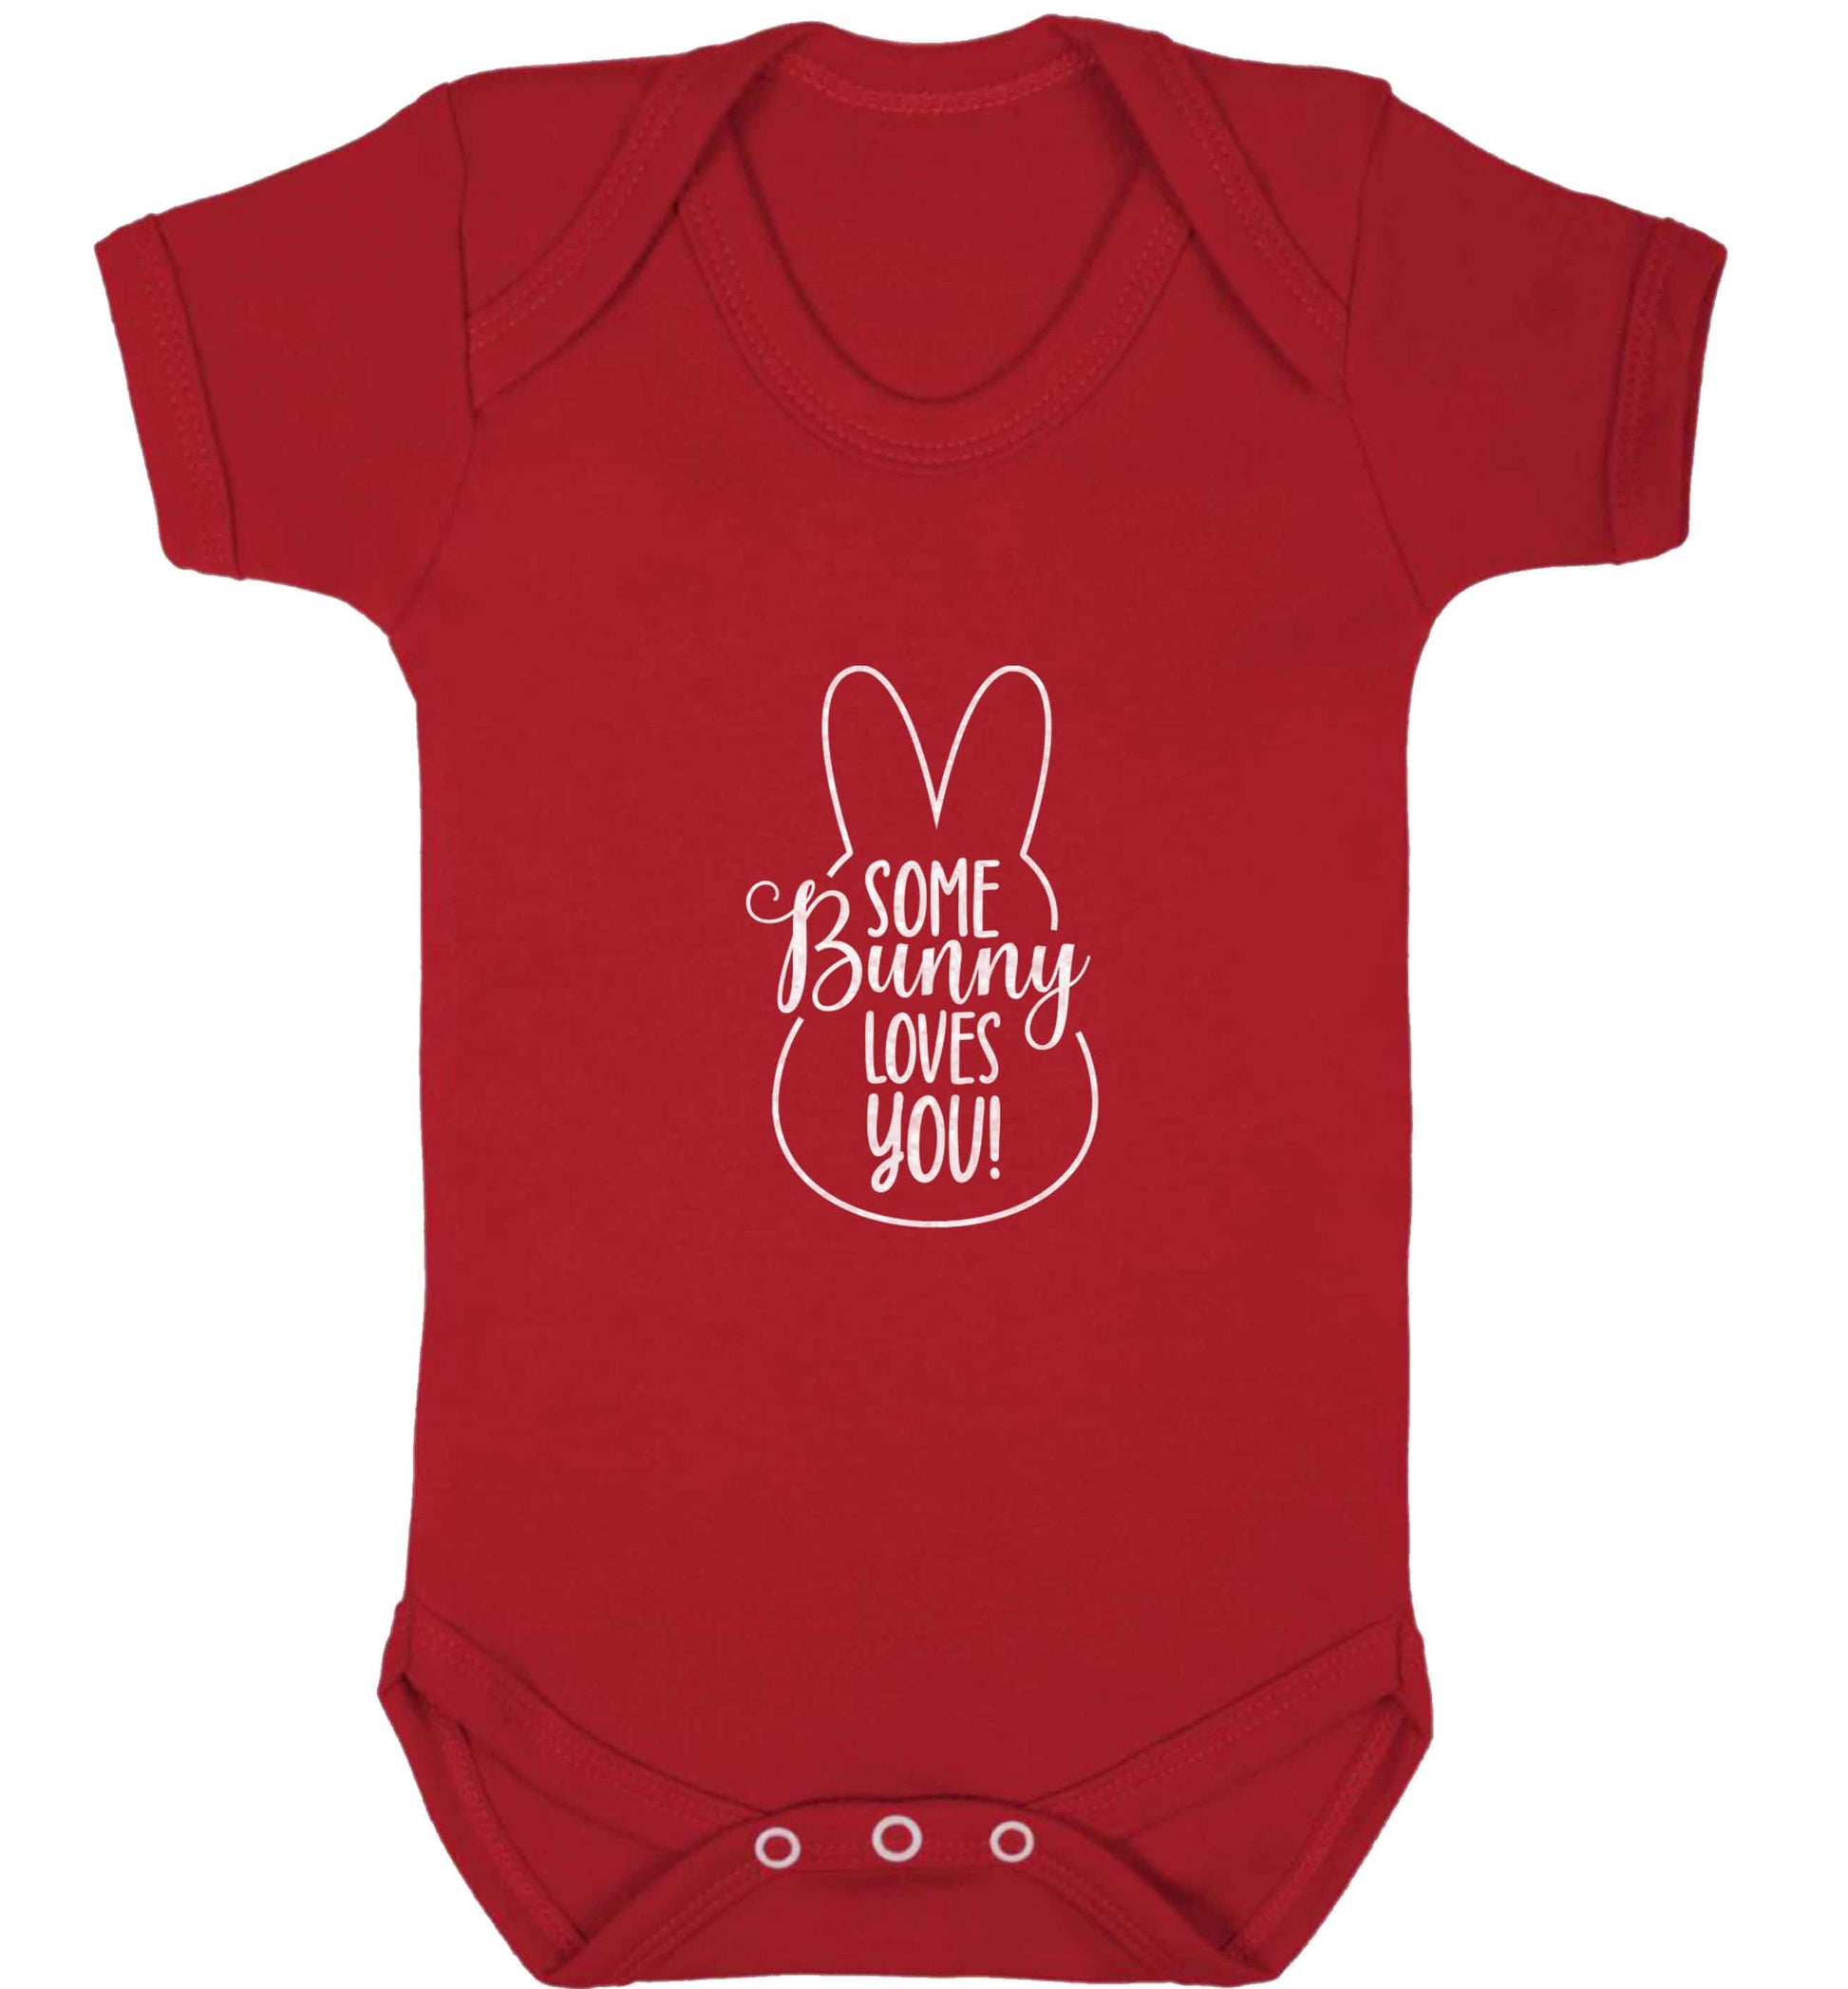 Some bunny loves you baby vest red 18-24 months